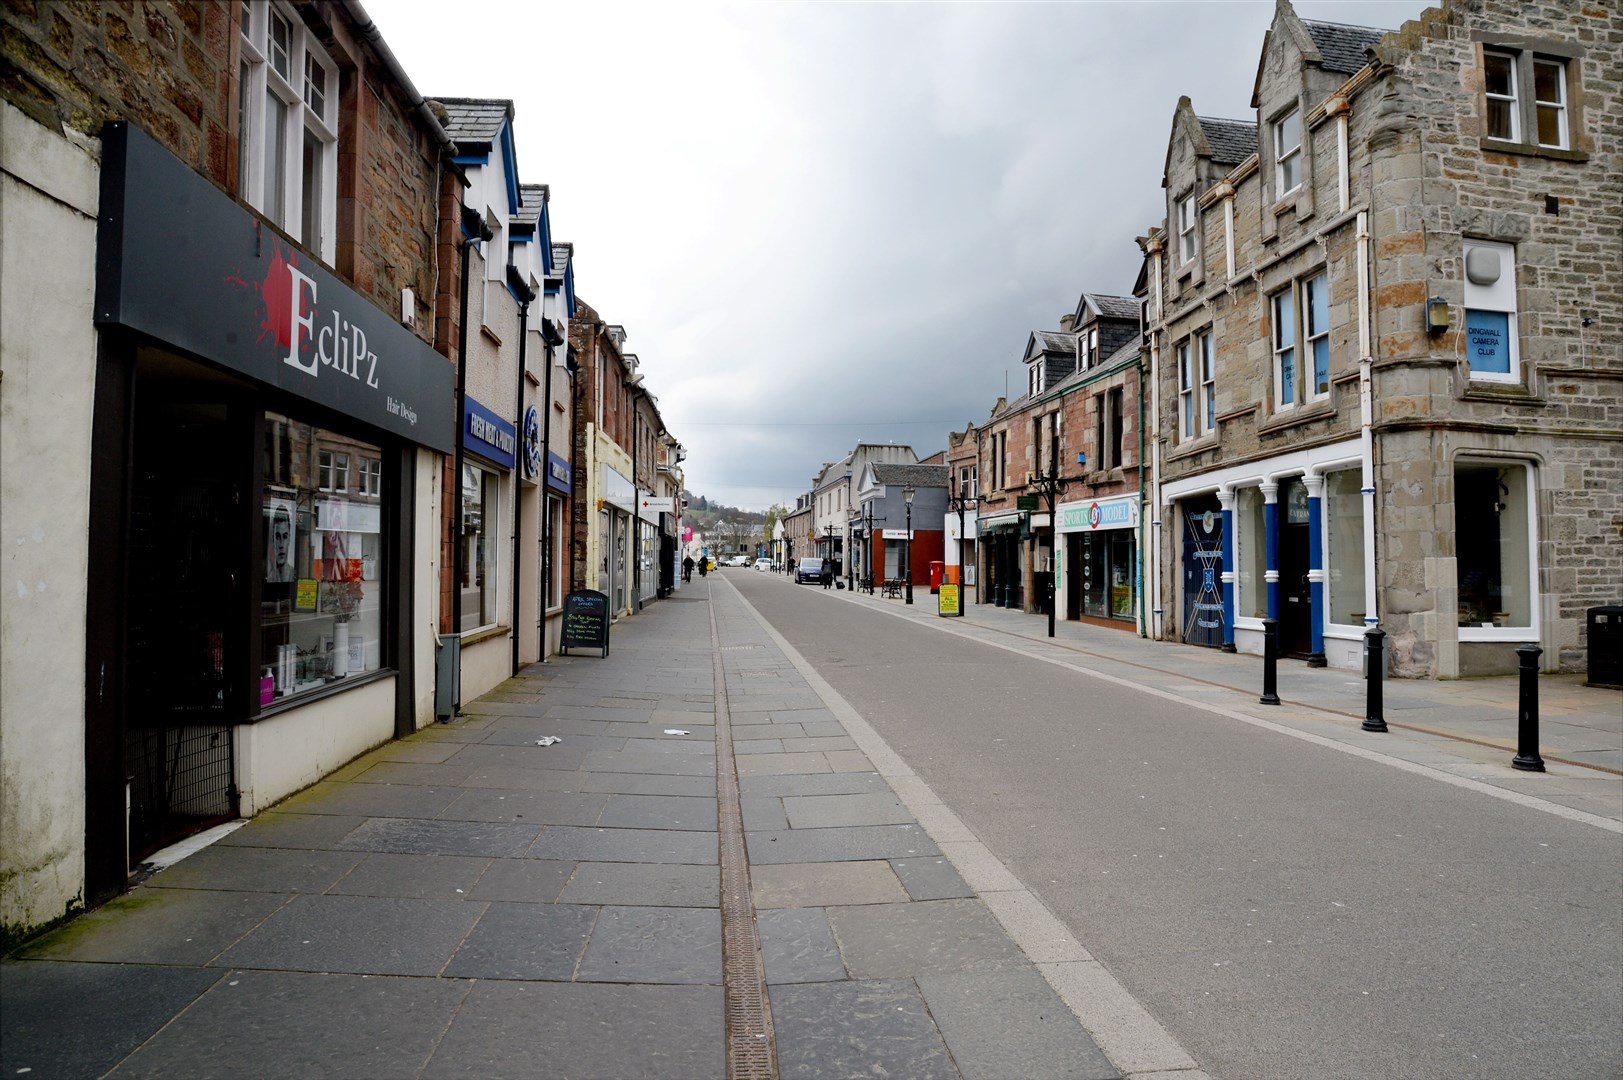 Dingwall High Street traders are amongst those in Ross-shire hoping to bounce back from the impact of coronavirus on business. Picture: Callum Mackay